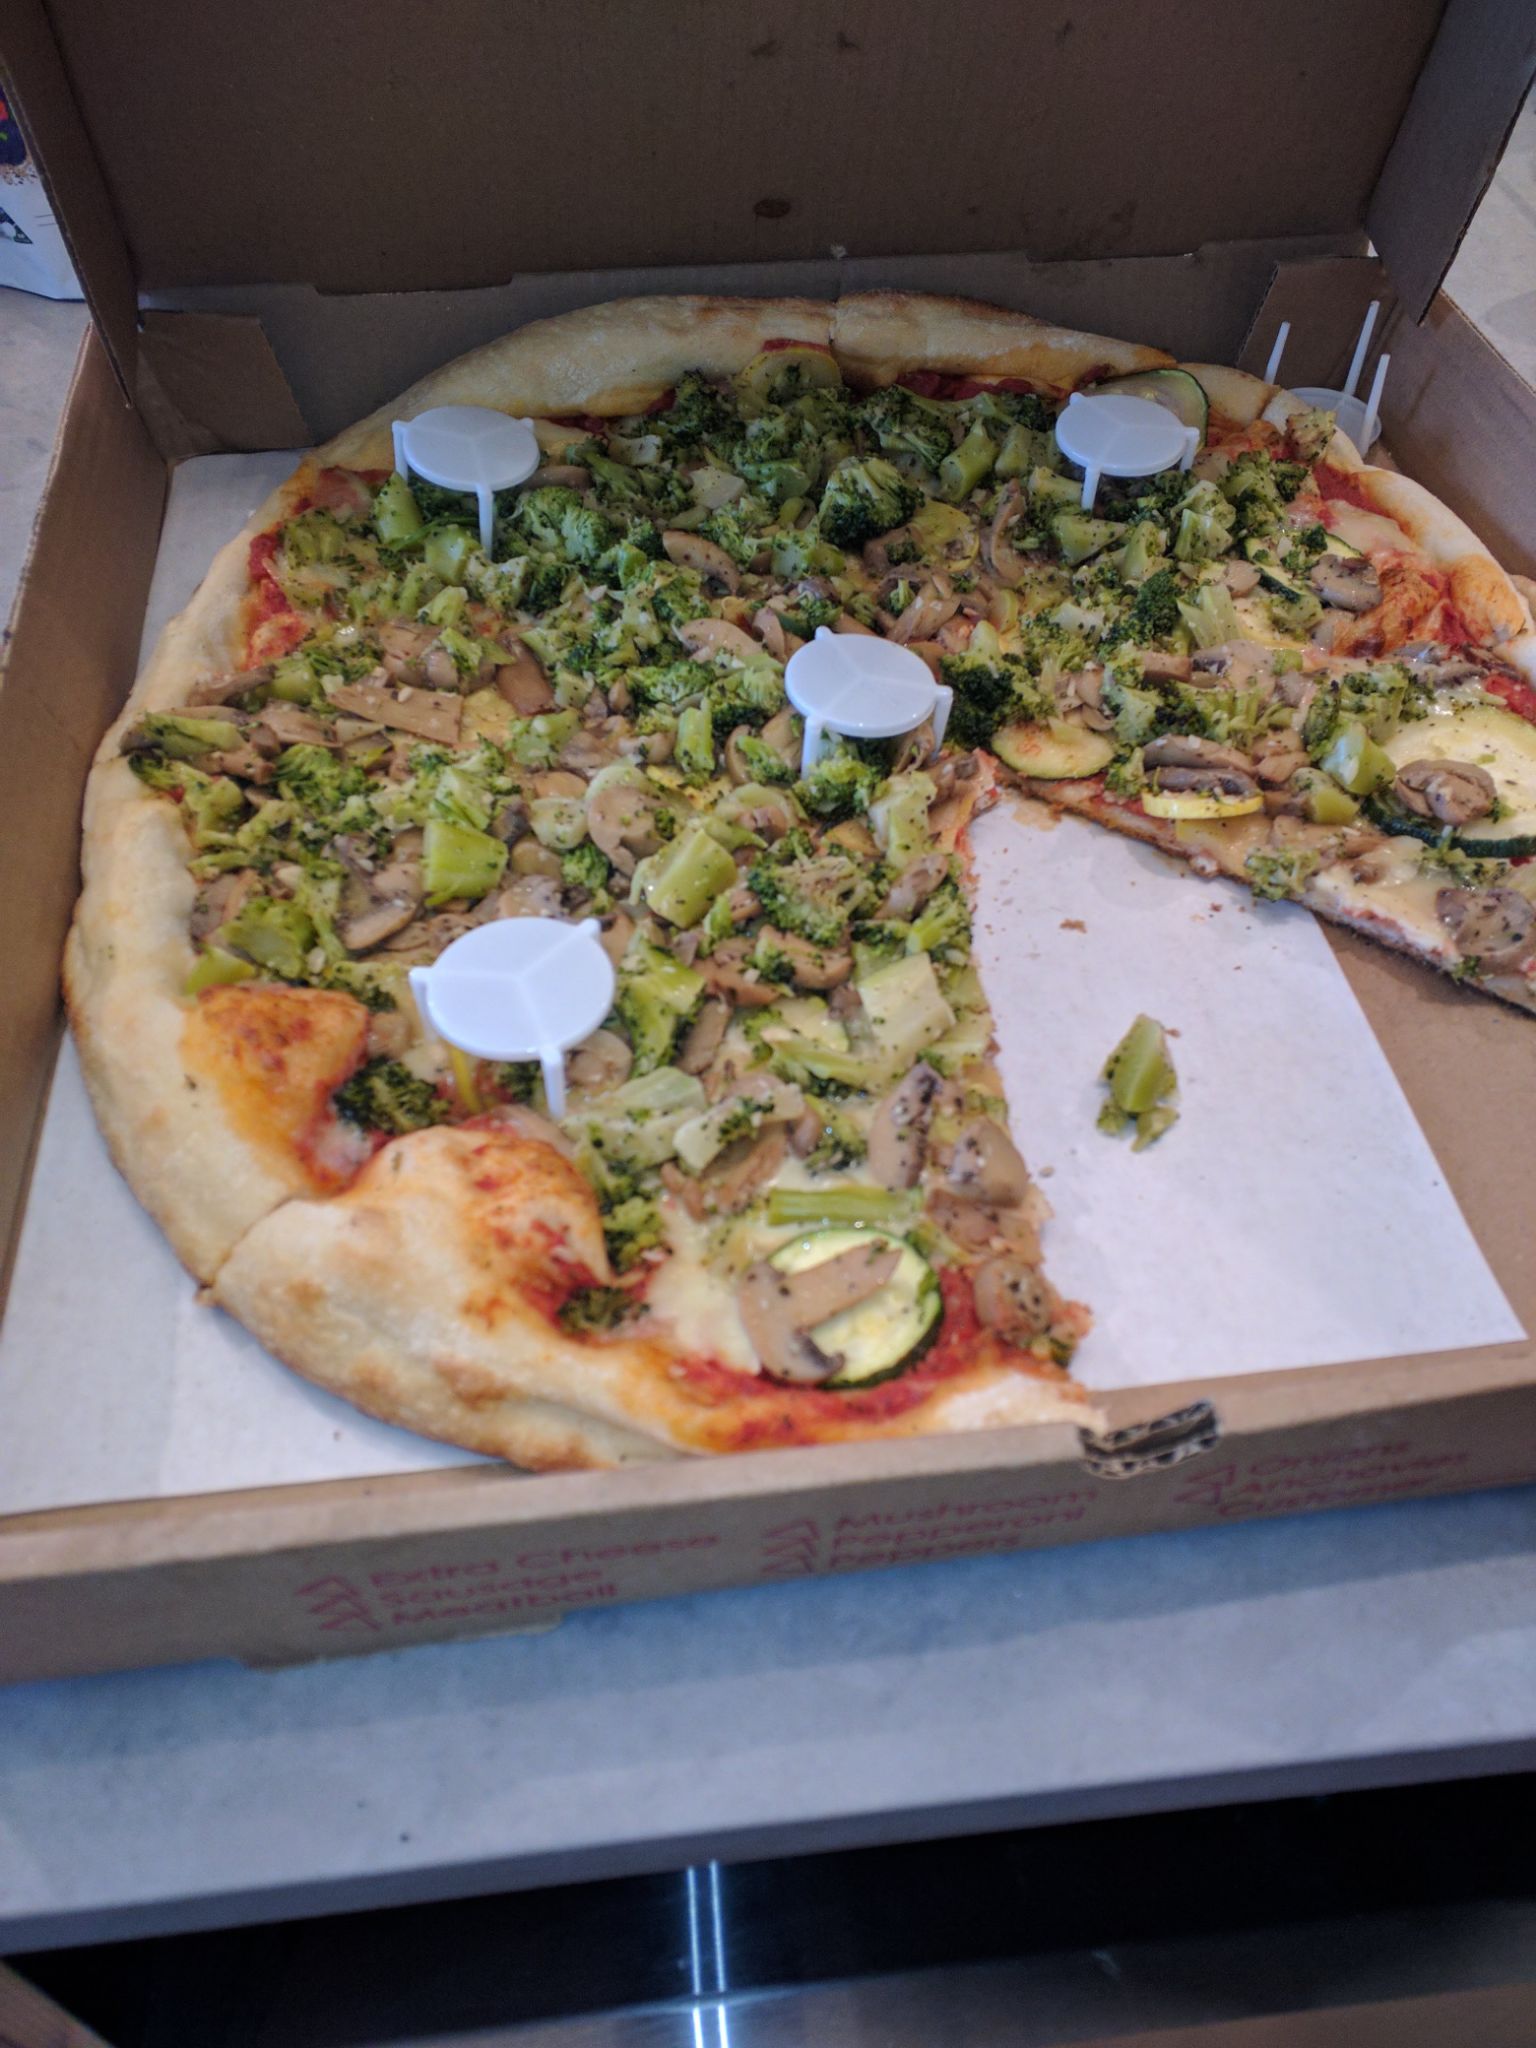 NYC Broccoli Pizza a favorite at my office